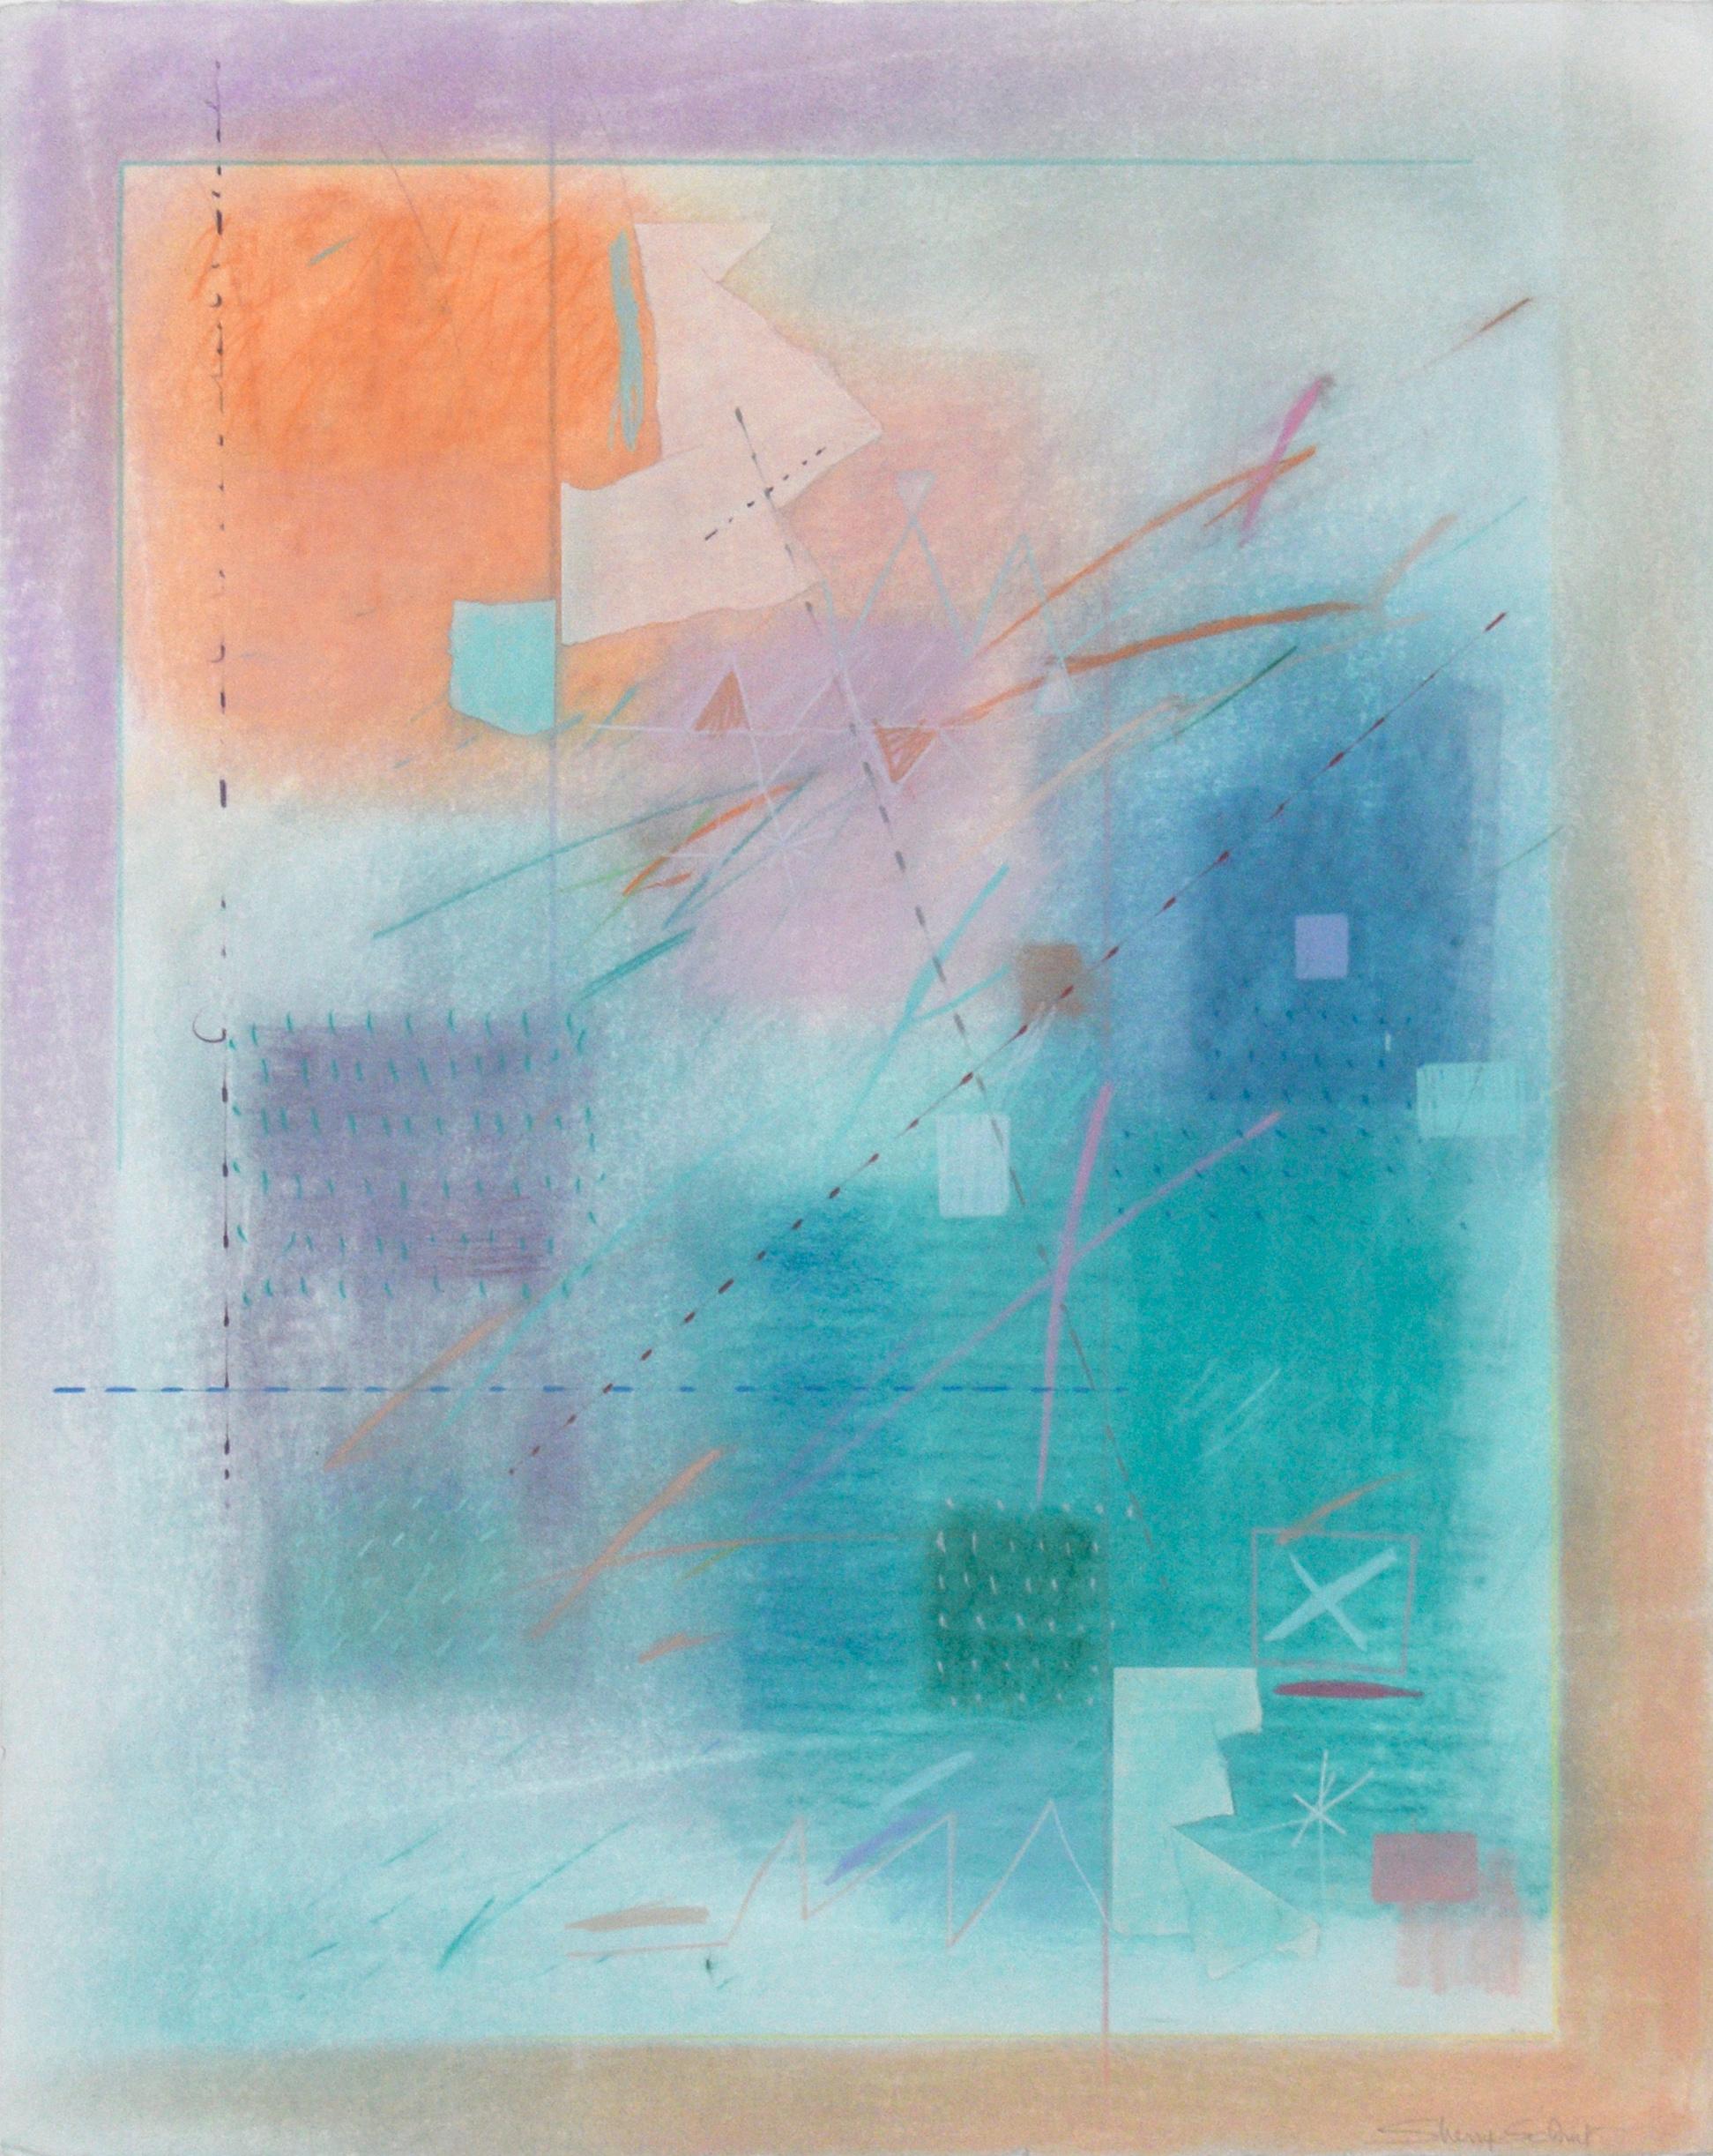 Vibrant Abstract Composition with Teal and Orange - Art by Sherry Schrut